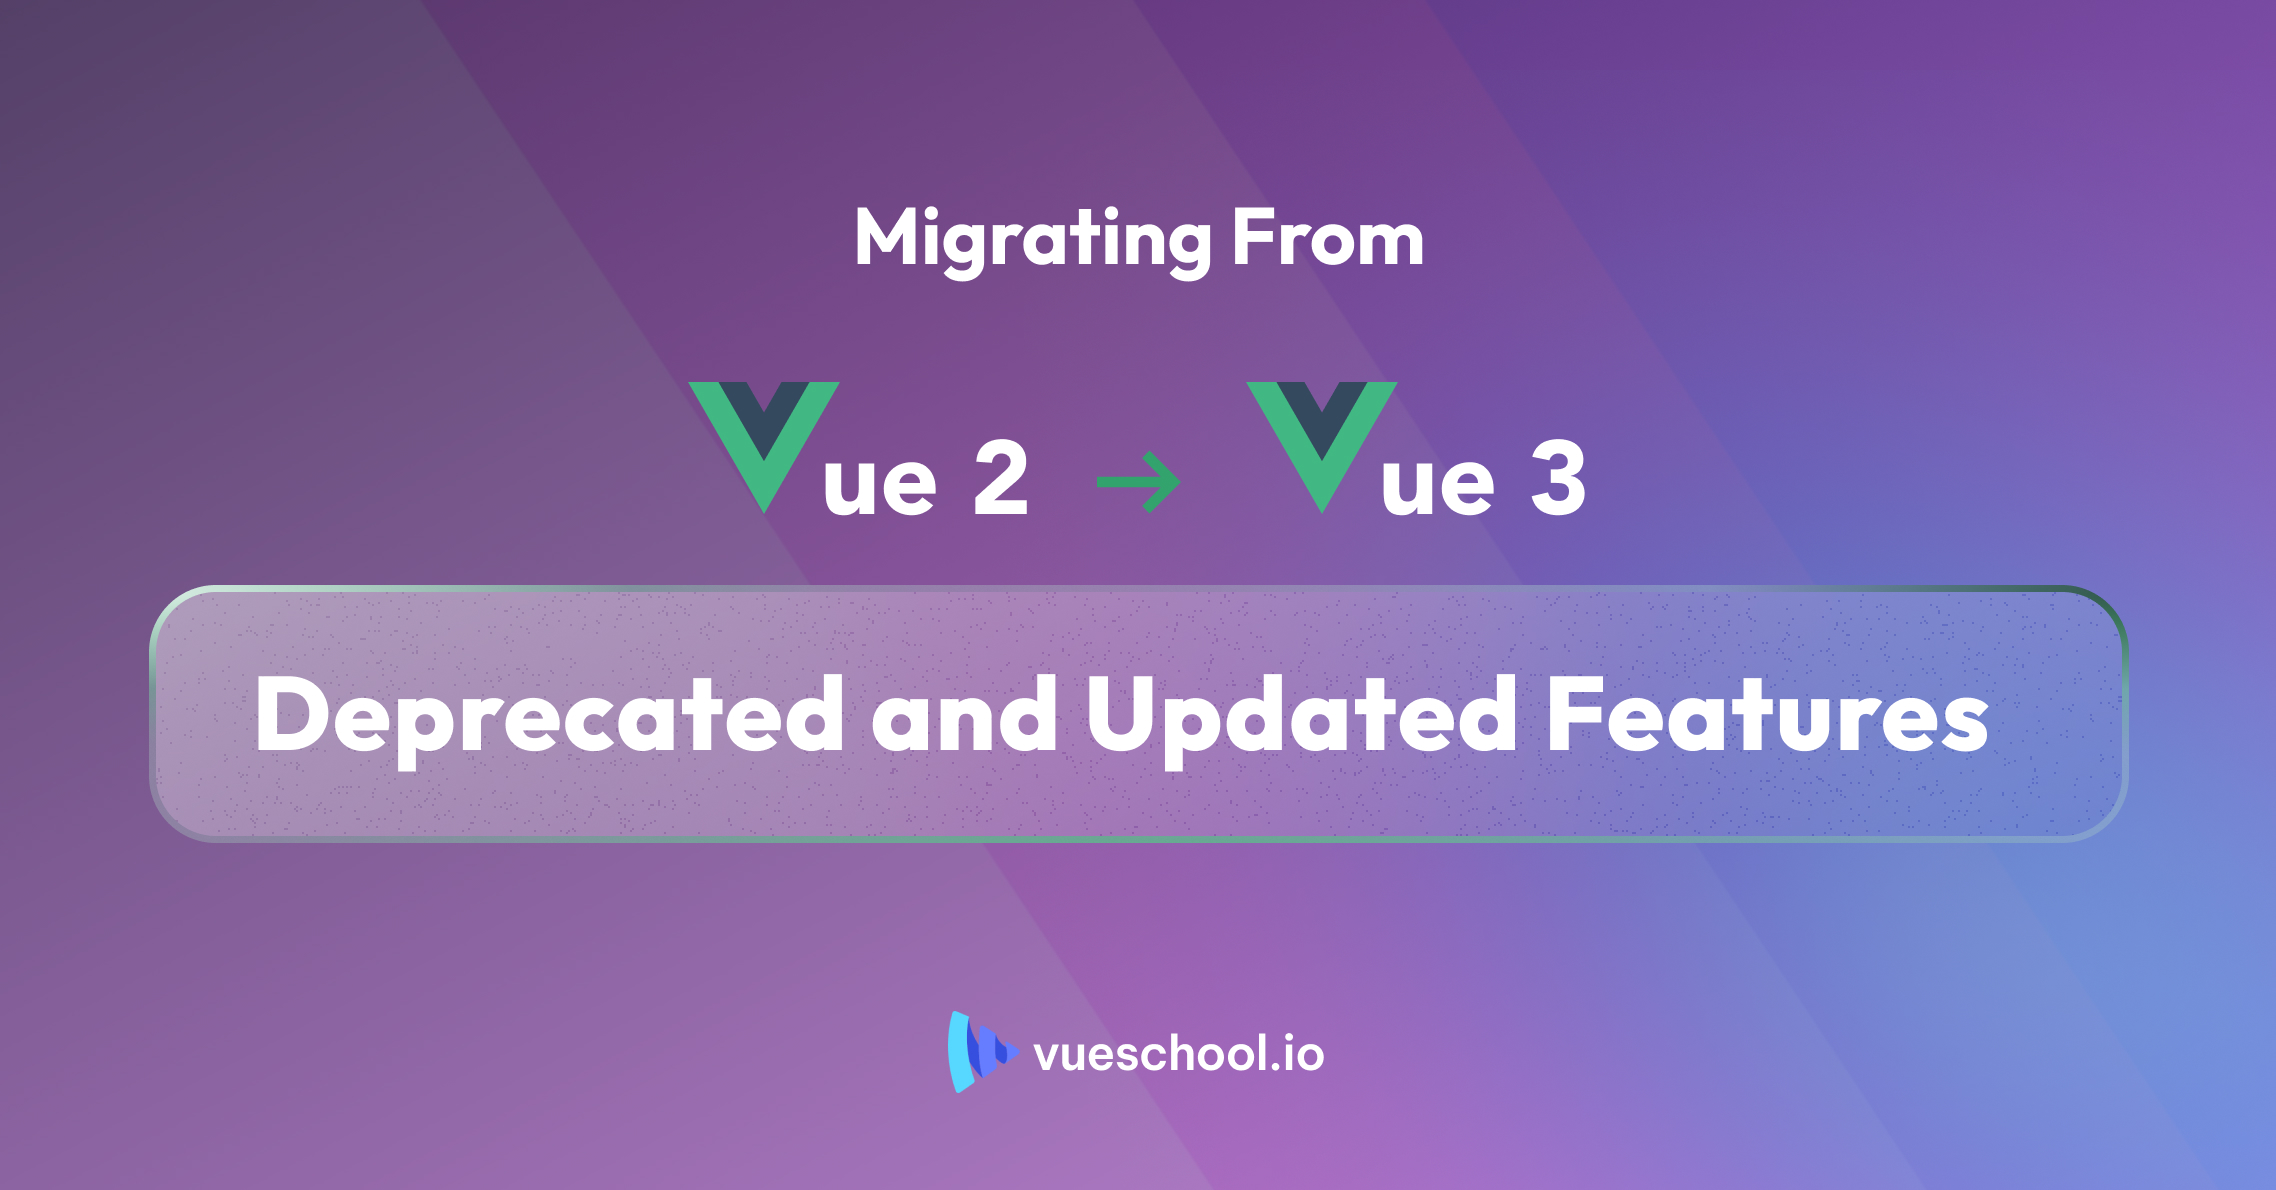 Migrating from Vue 2 To Vue 3 &#8211; Deprecated and Updated Features